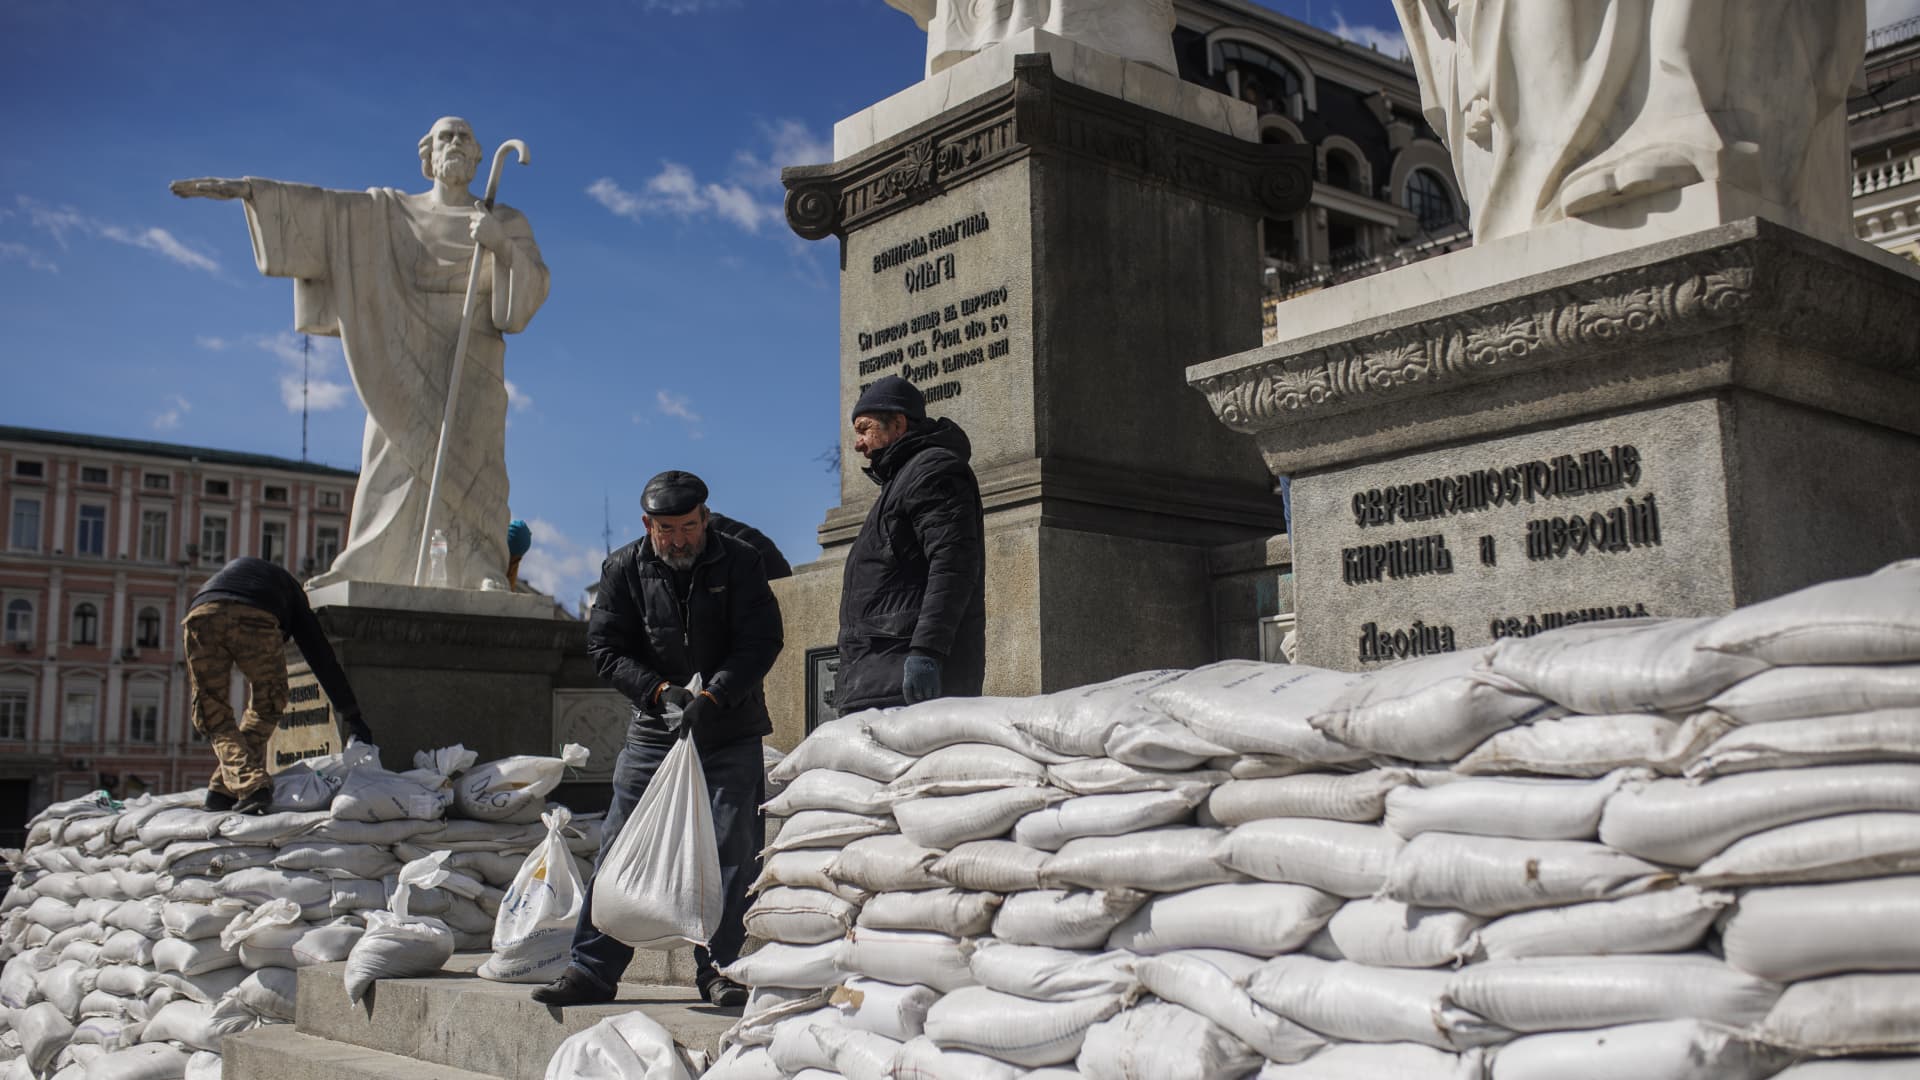 People prepare sand bags to cover statues in an effort to protect cultural and historical heritage amid Russian attacks in Kyiv, Ukraine on March 27, 2022.